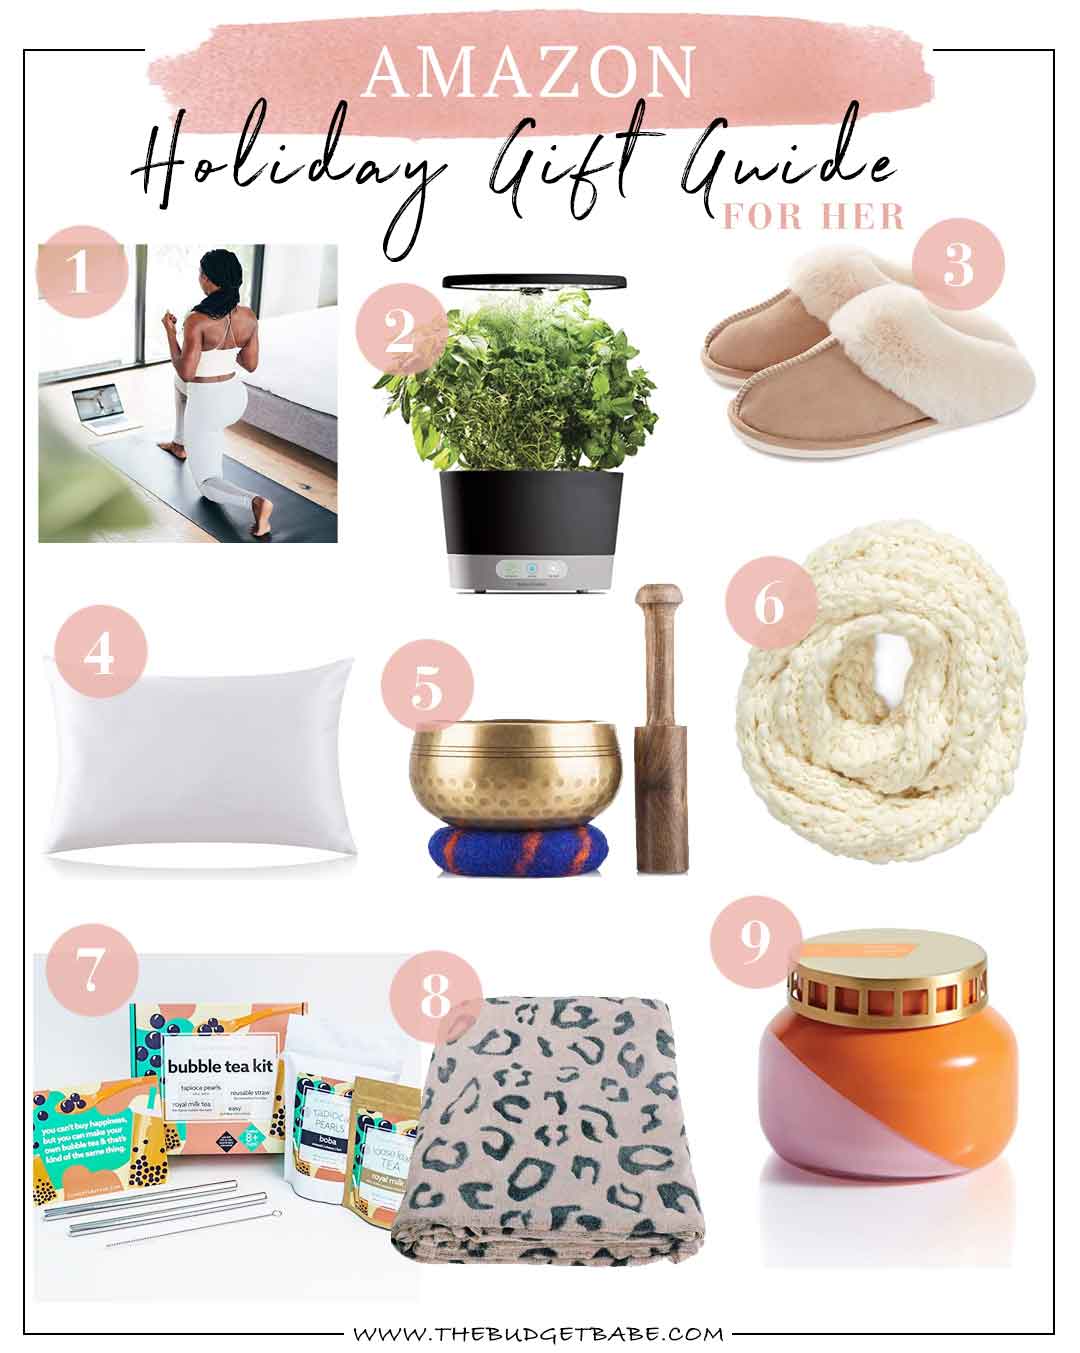 Amazon Gift Guide for Her Holiday Edition